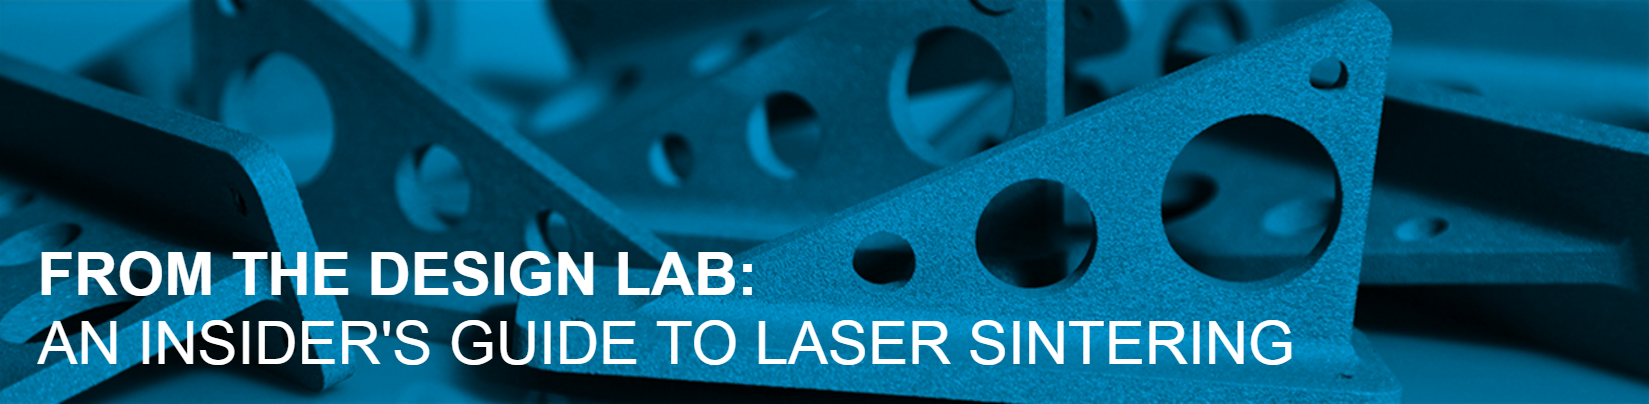 An Insider's Guide to Laser Sintering